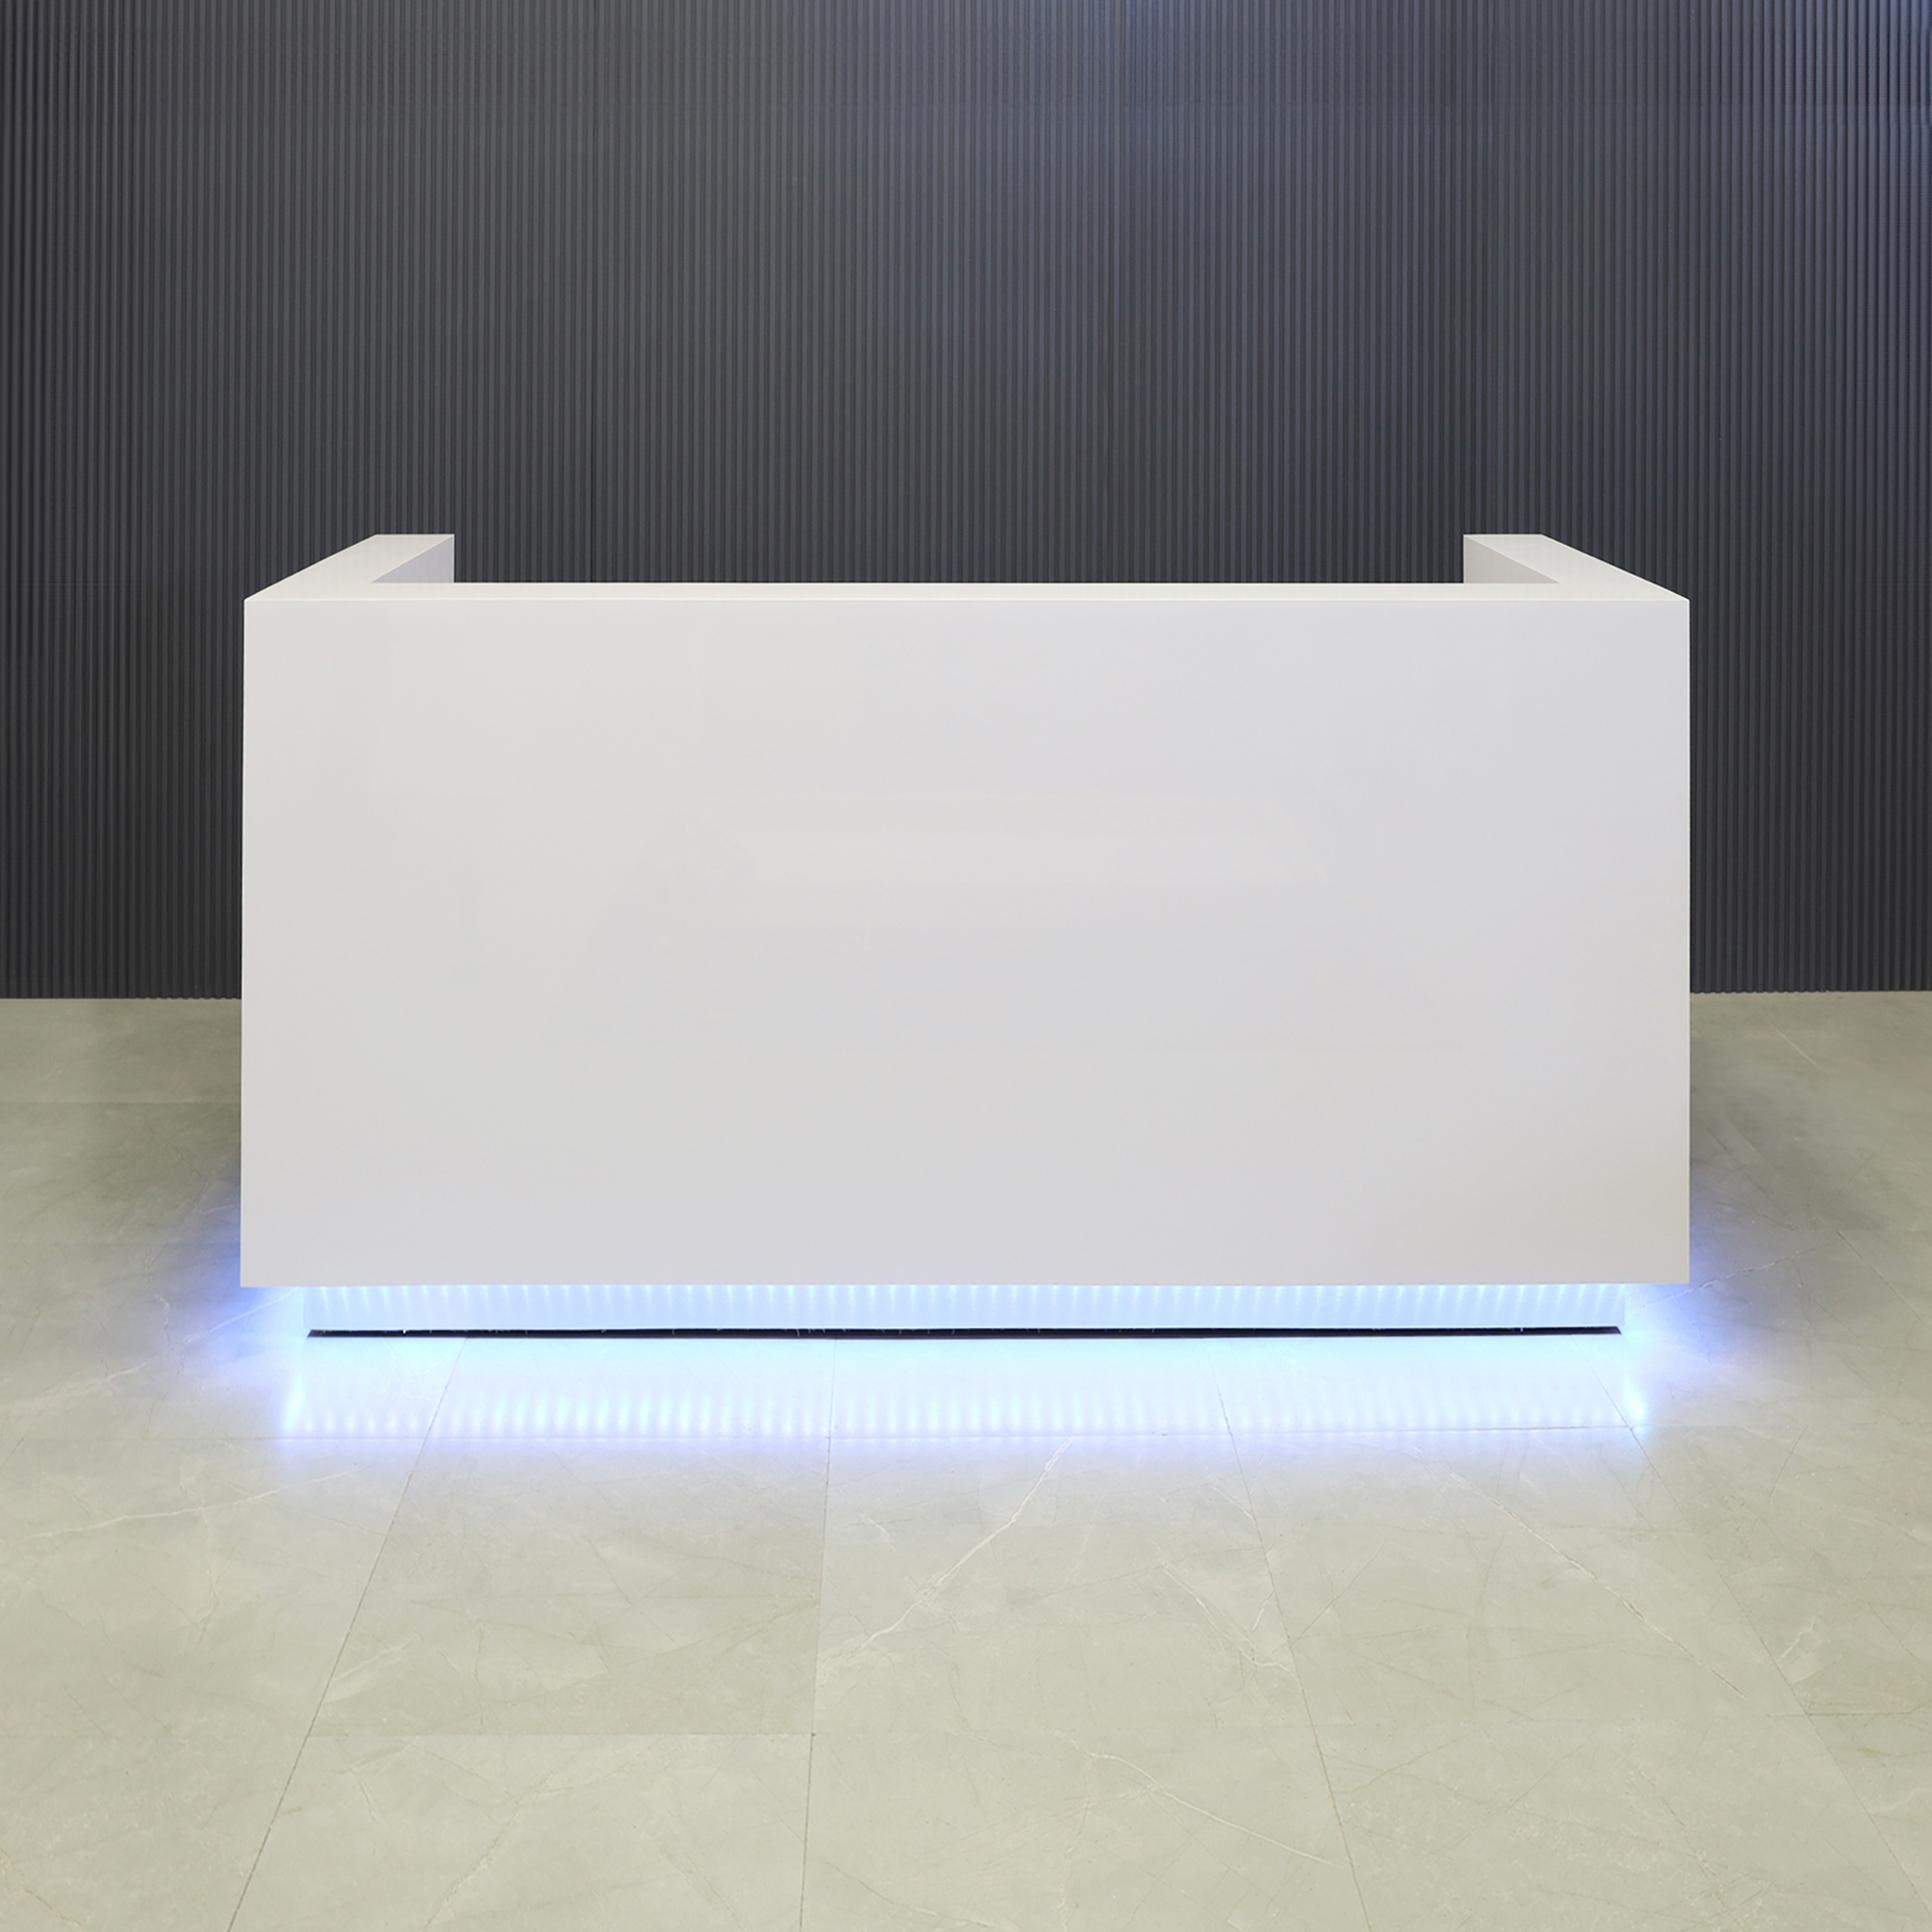 84-inch Dallas U-Shape Reception Desk in white gloss laminate main desk and brushed aluminum toe-kick, with color LED, shown here.